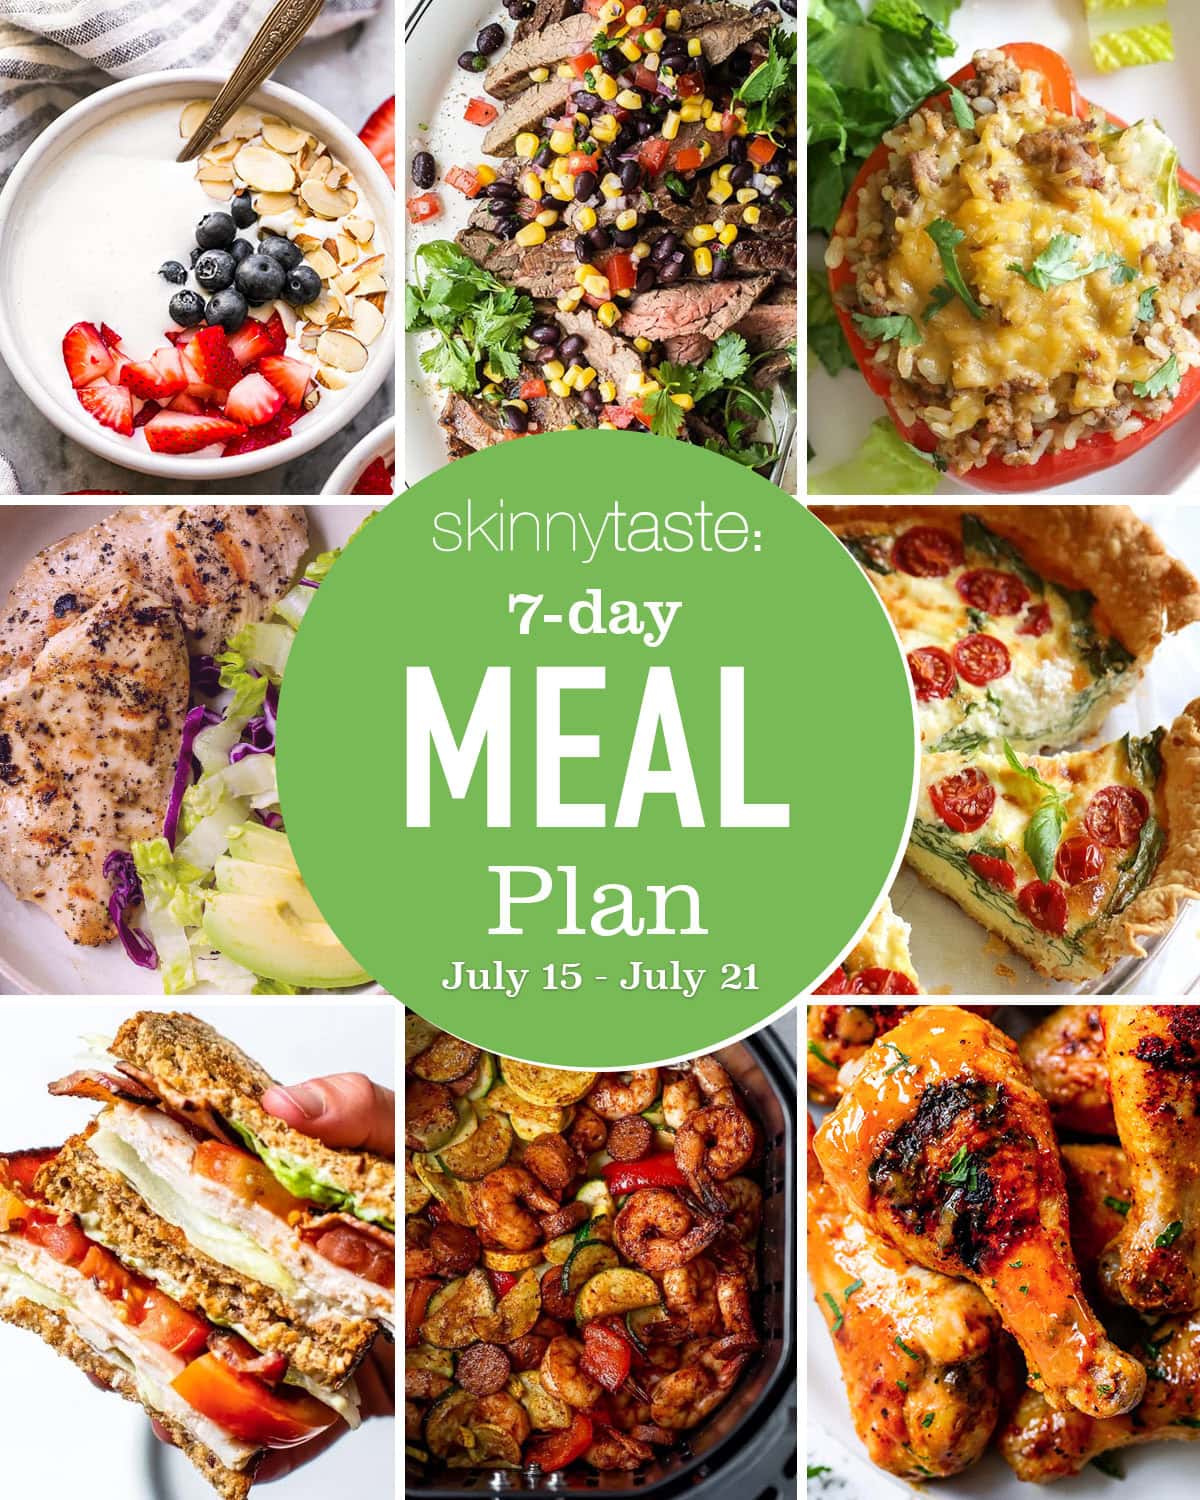 Free 7 Day Healthy Meal Plan (July 15-21)